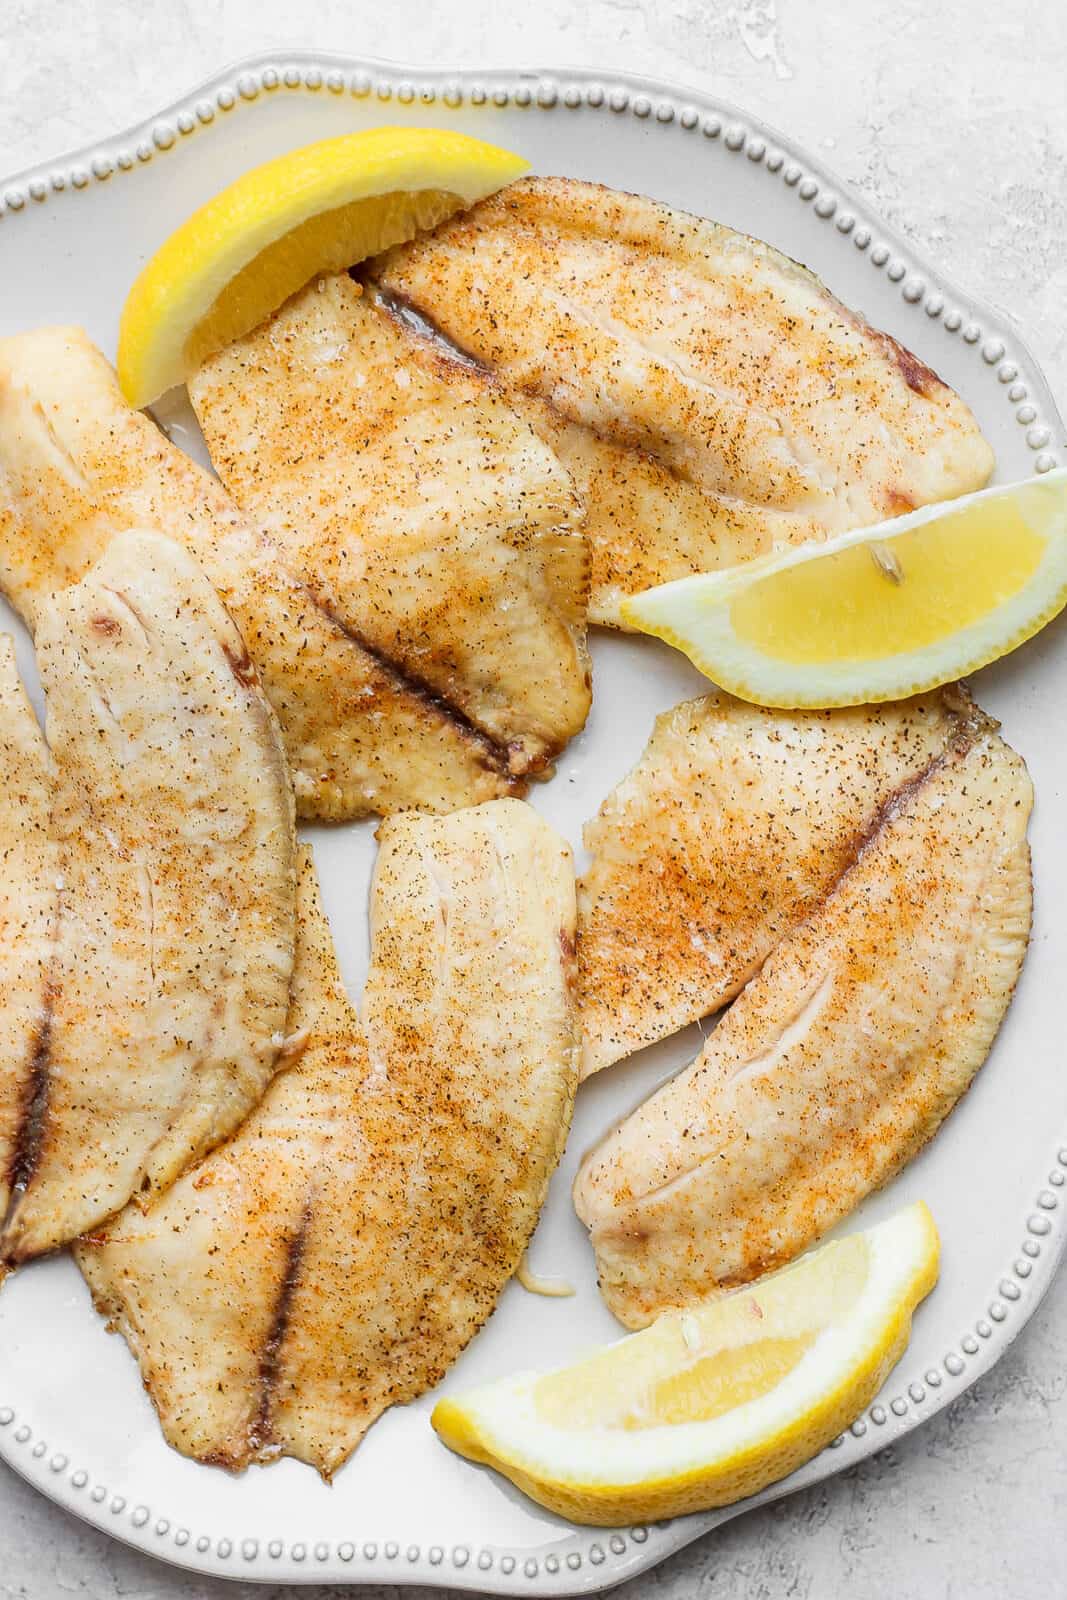 Oven Baked Tilapia - The Wooden Skillet